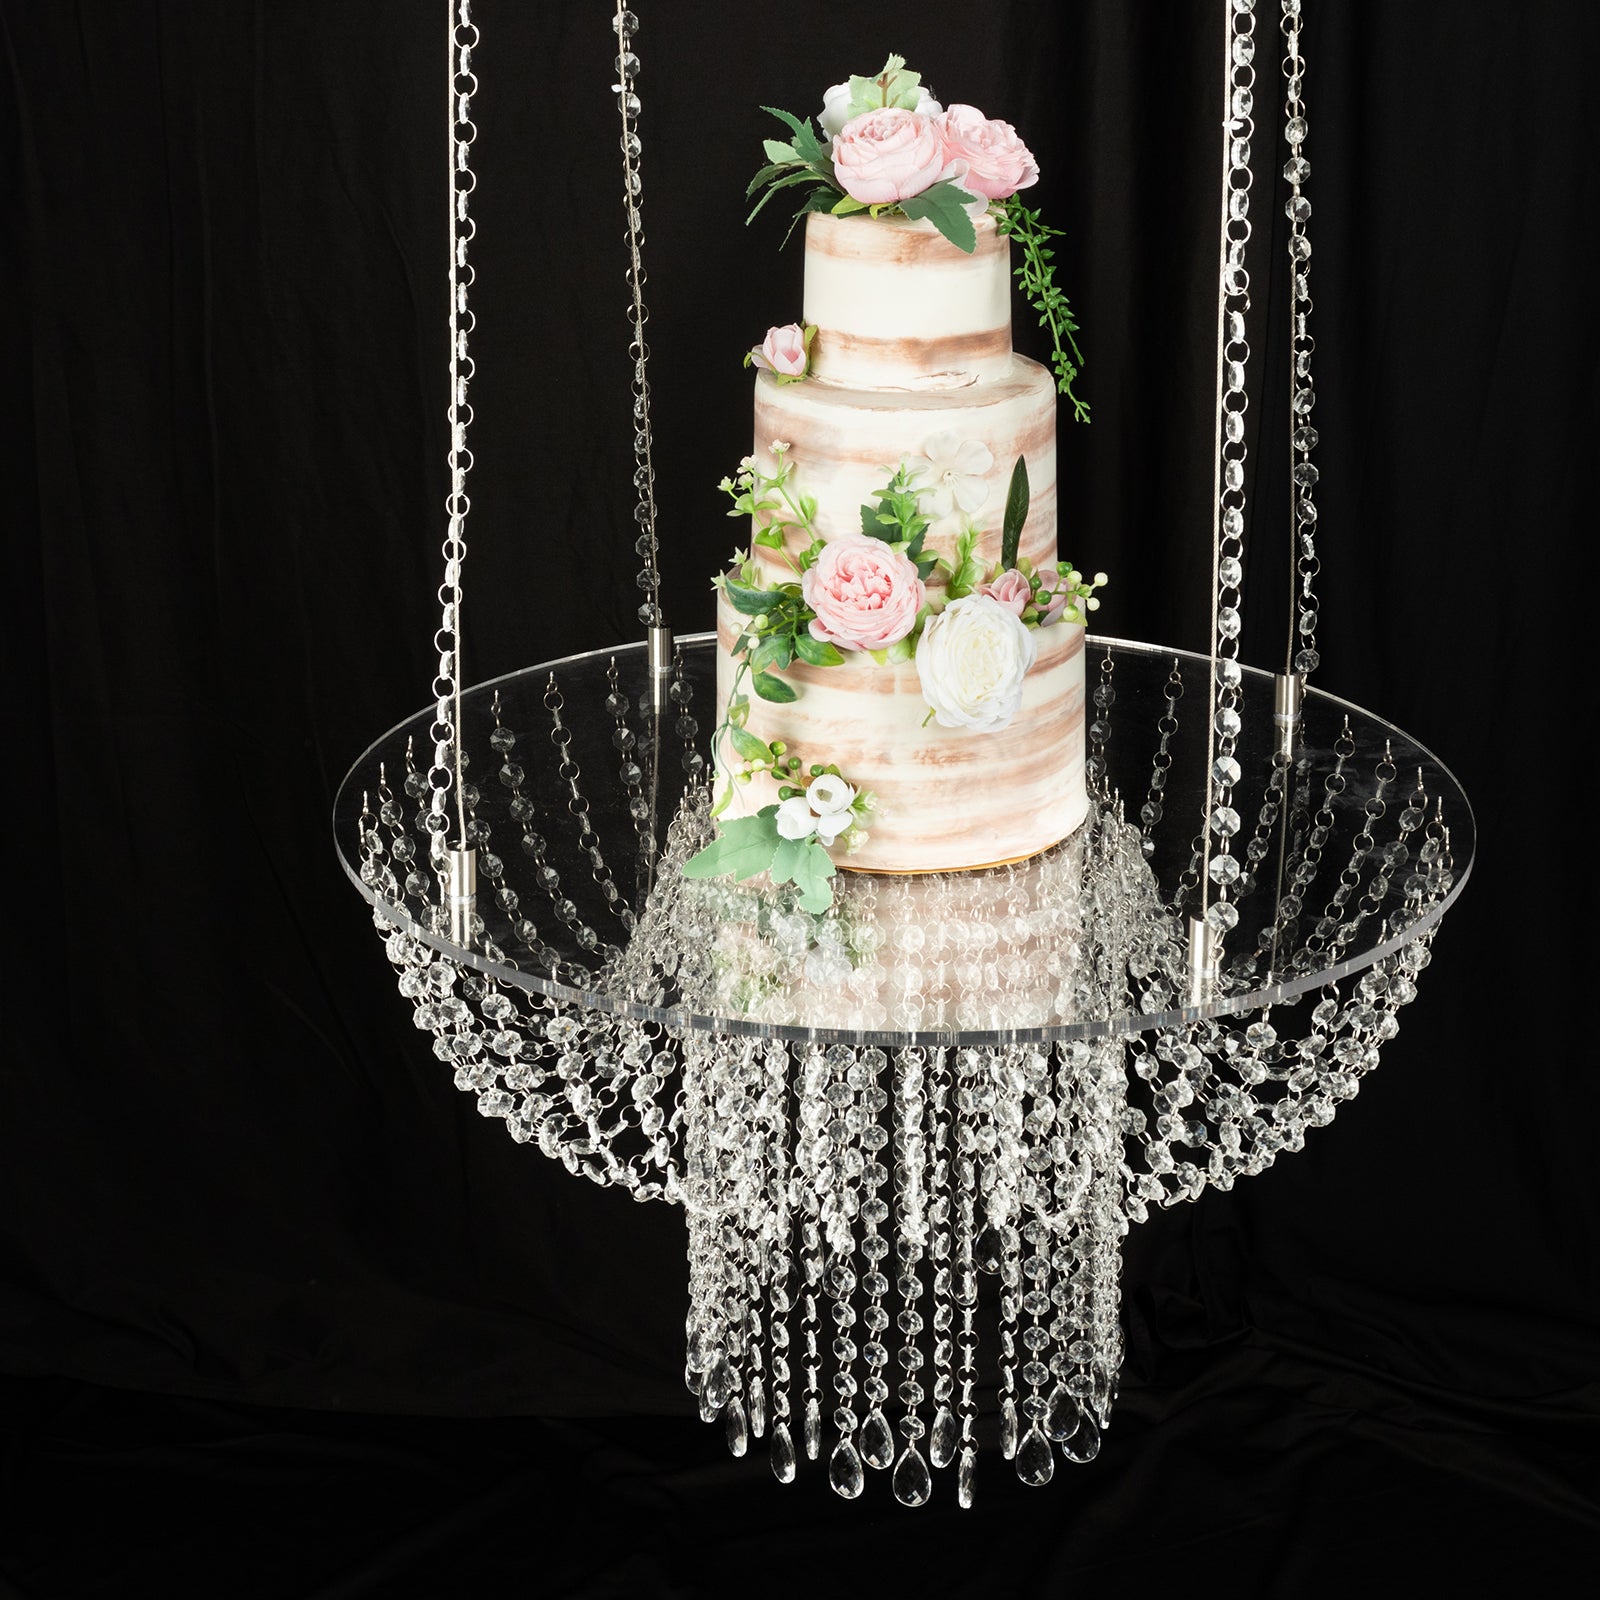 3 Tier Square Chandelier Cake Stand | Hanging Cake Stand | Cakestackers